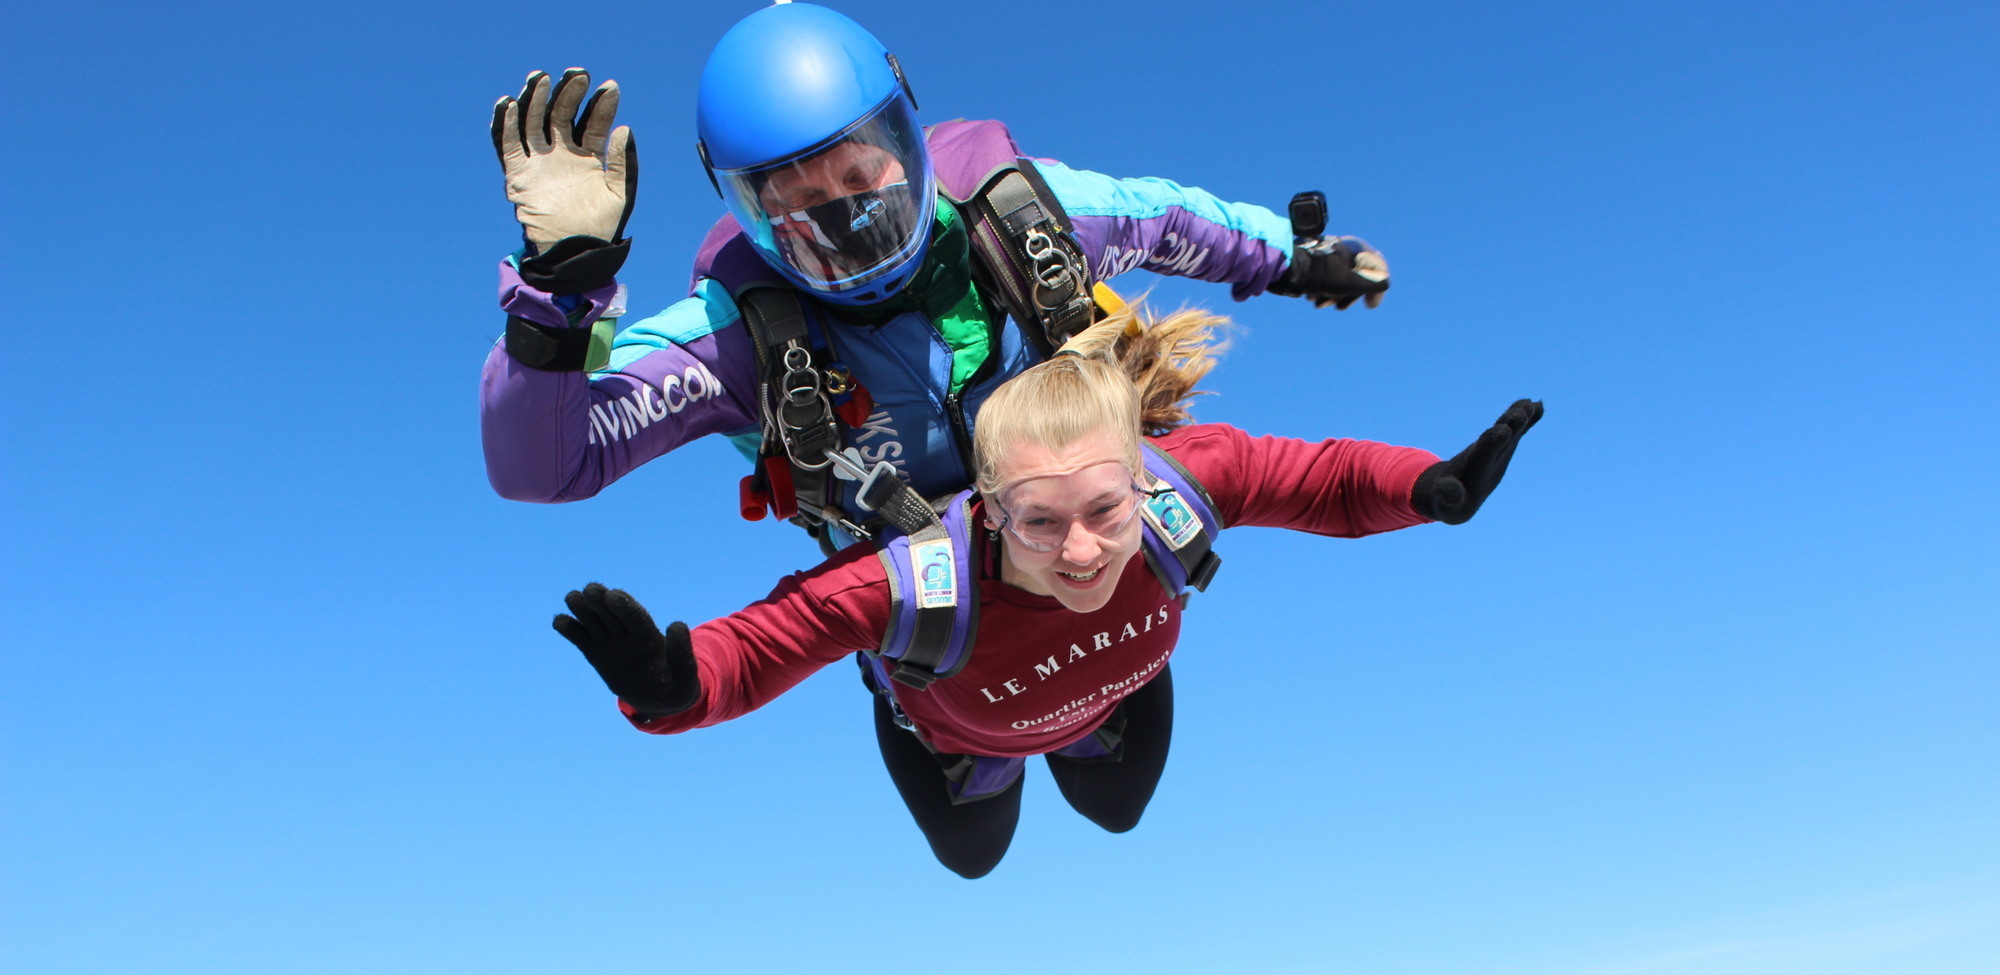 Tina Clark skydiving (cropped)